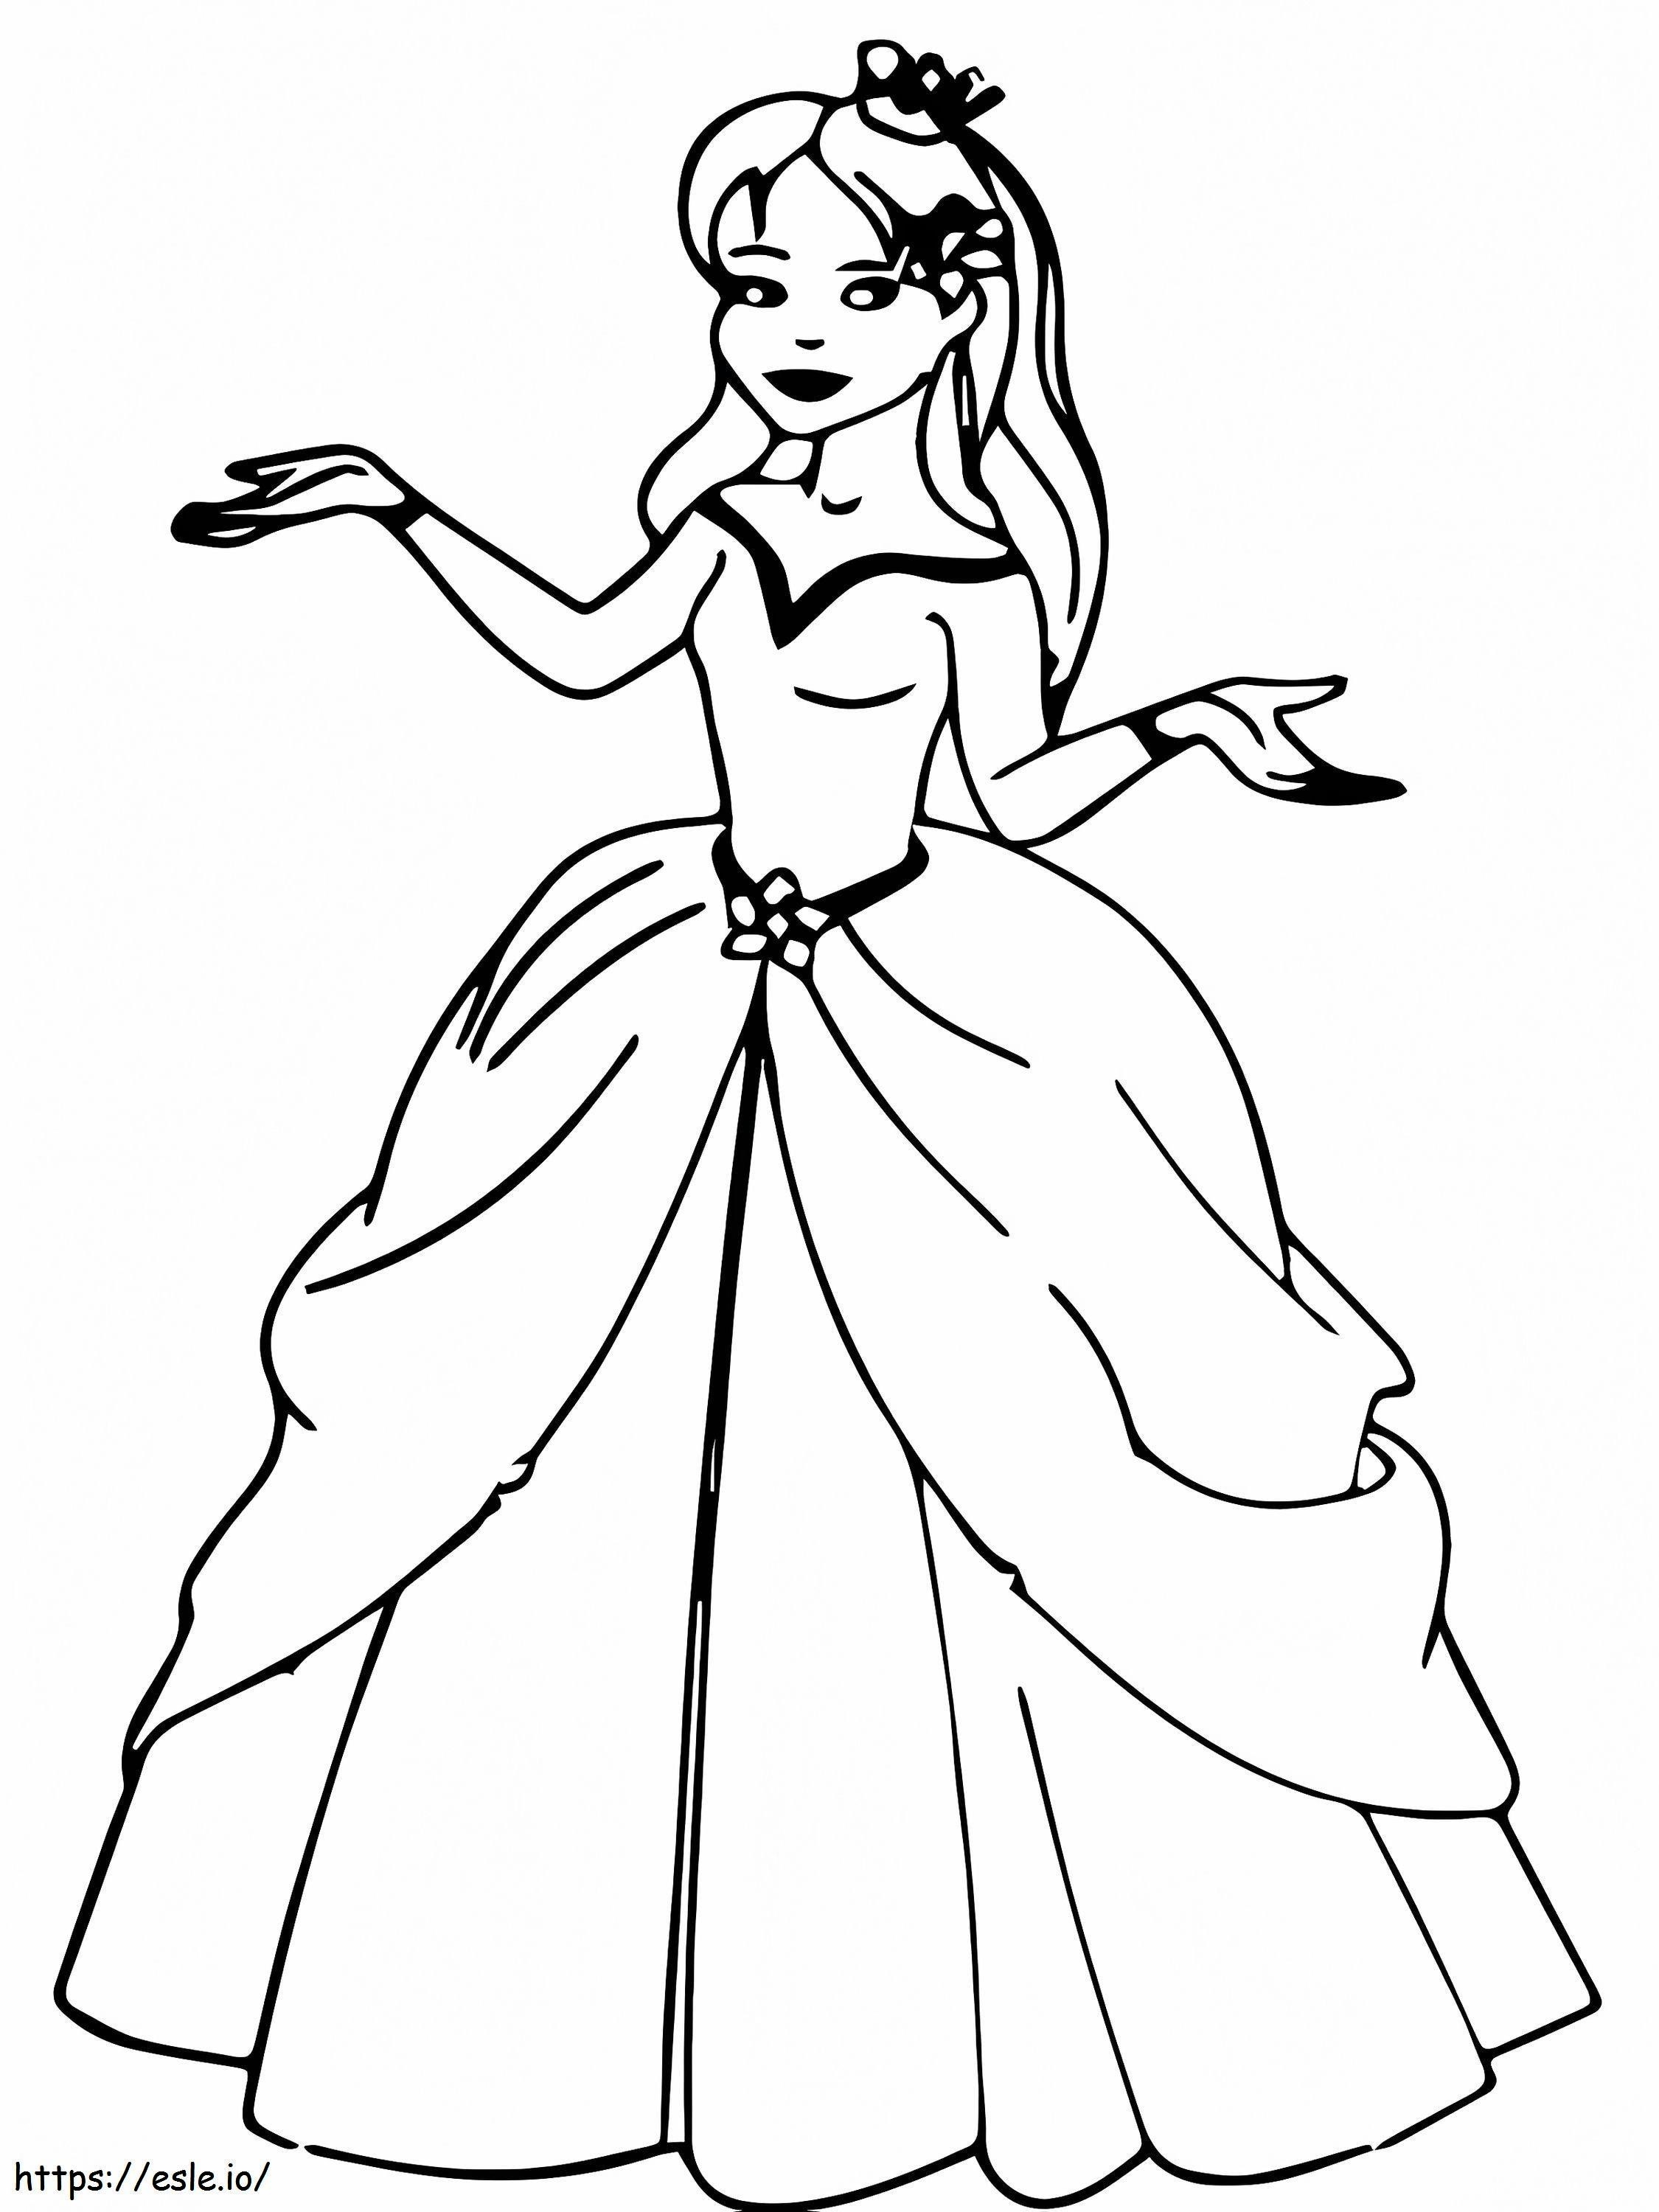 Attractive Princess And The Pea coloring page